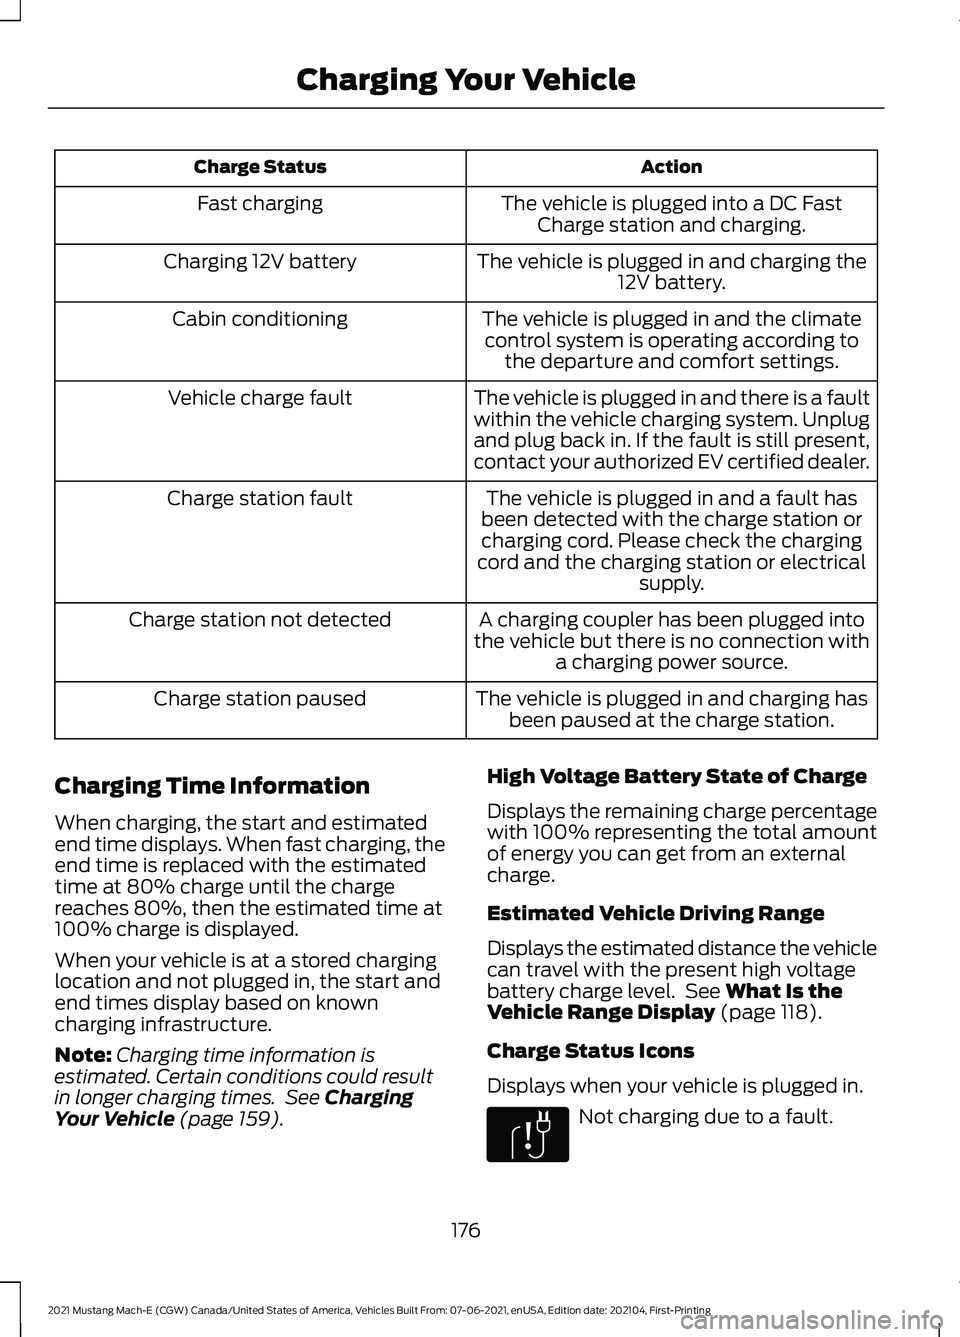 FORD MUSTANG MACH-E 2021  Owners Manual Action
Charge Status
The vehicle is plugged into a DC FastCharge station and charging.
Fast charging
The vehicle is plugged in and charging the12V battery.
Charging 12V battery
The vehicle is plugged 